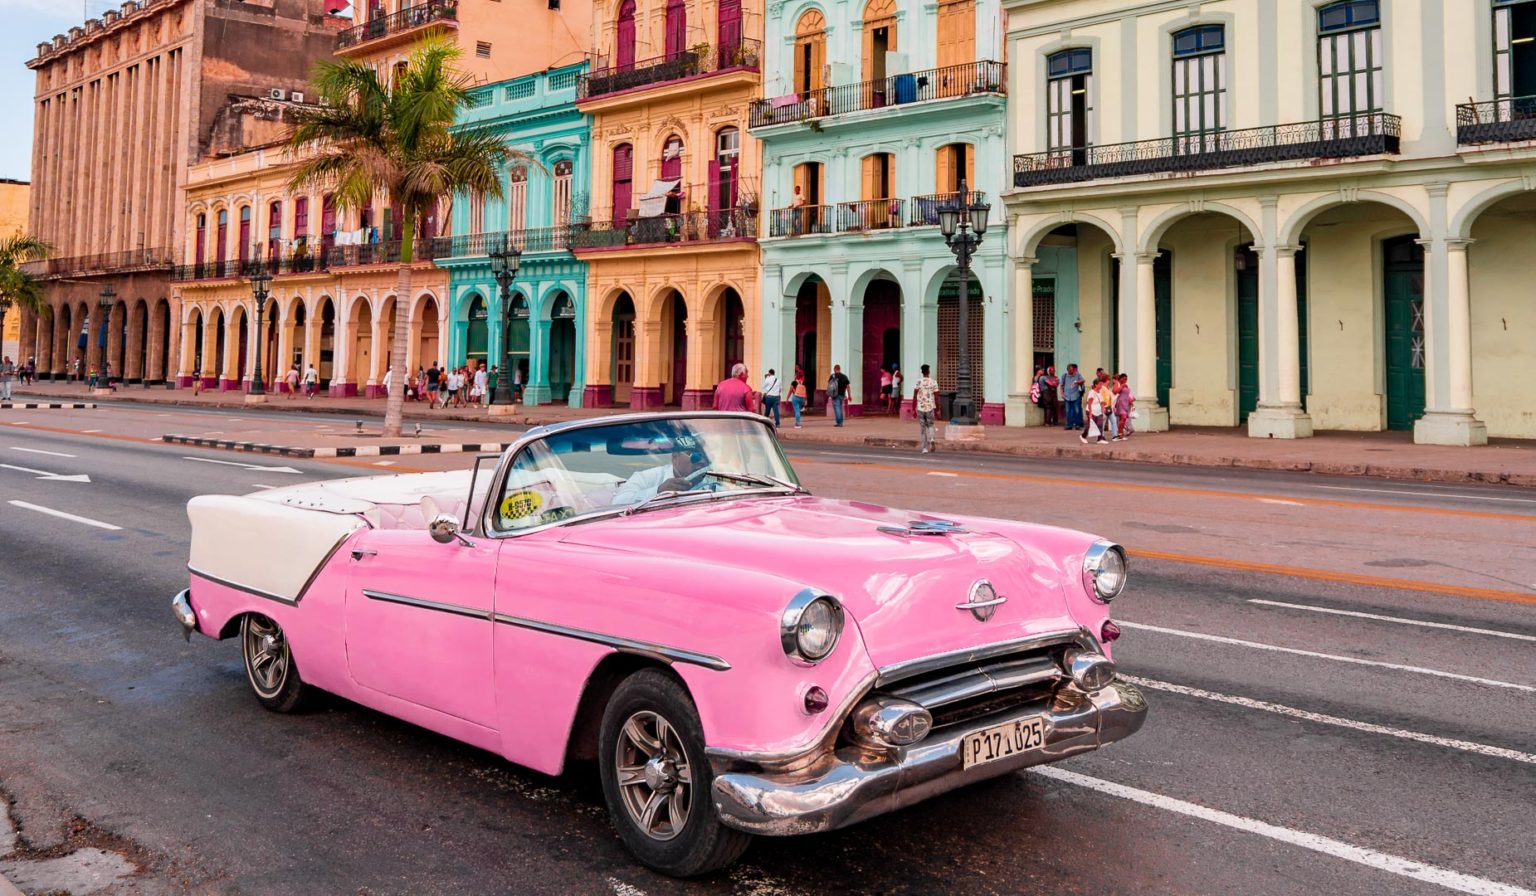 The Top 10 Things To Do In Havana Cuba • The Top 10 Things To Do In Havana Cuba 